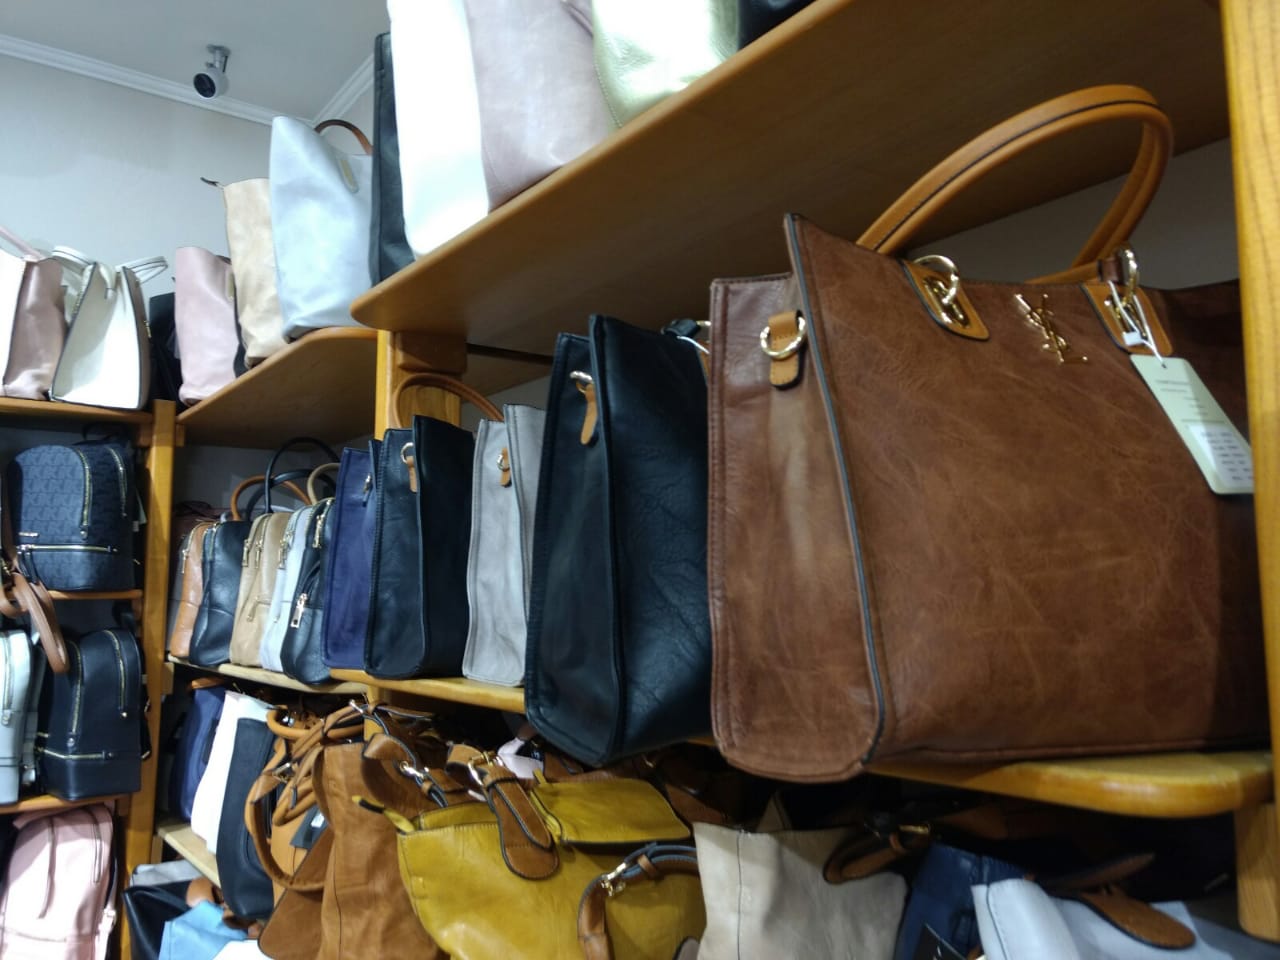 Fines of 37,000 euros for counterfeit goods in Lefkada